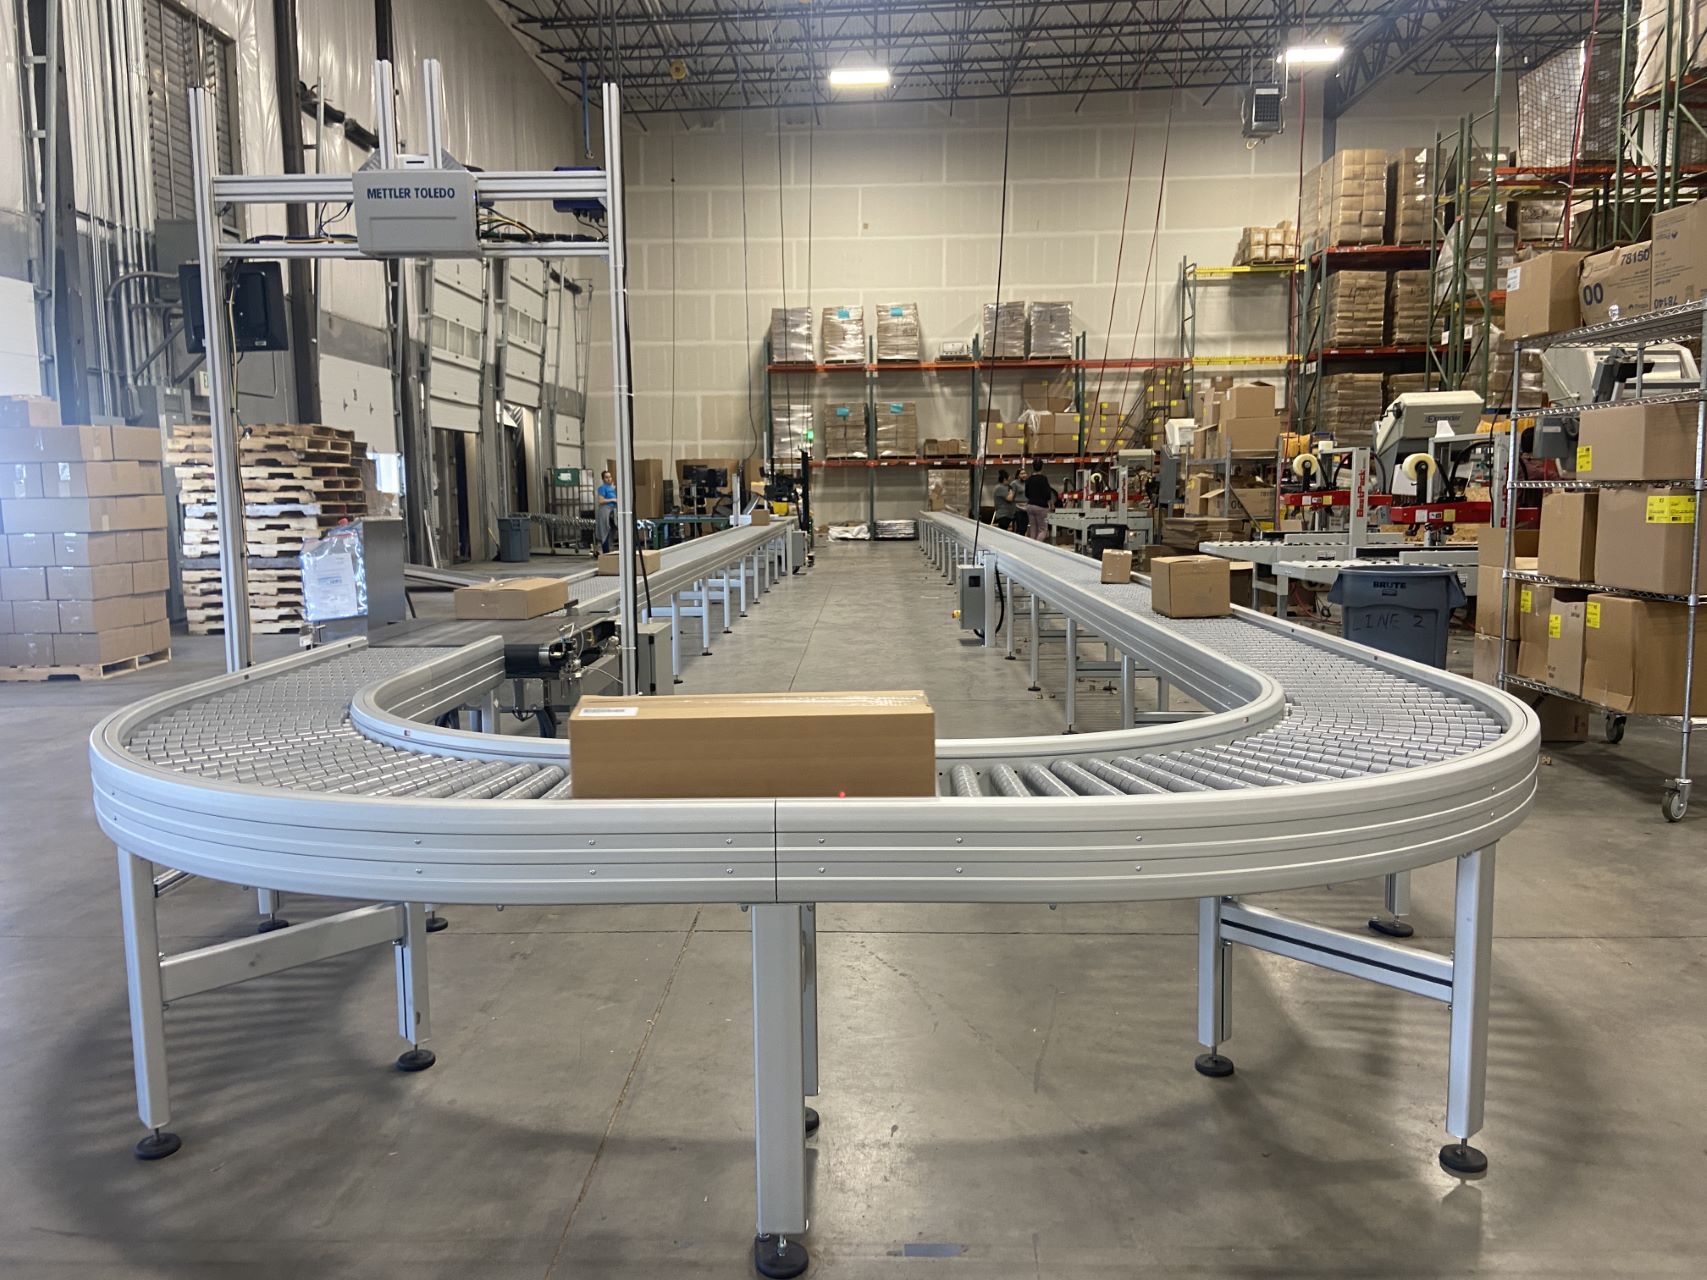 A DynaRoller zone powered roller conveyor in a manufacturing facility with packages being conveyed on it